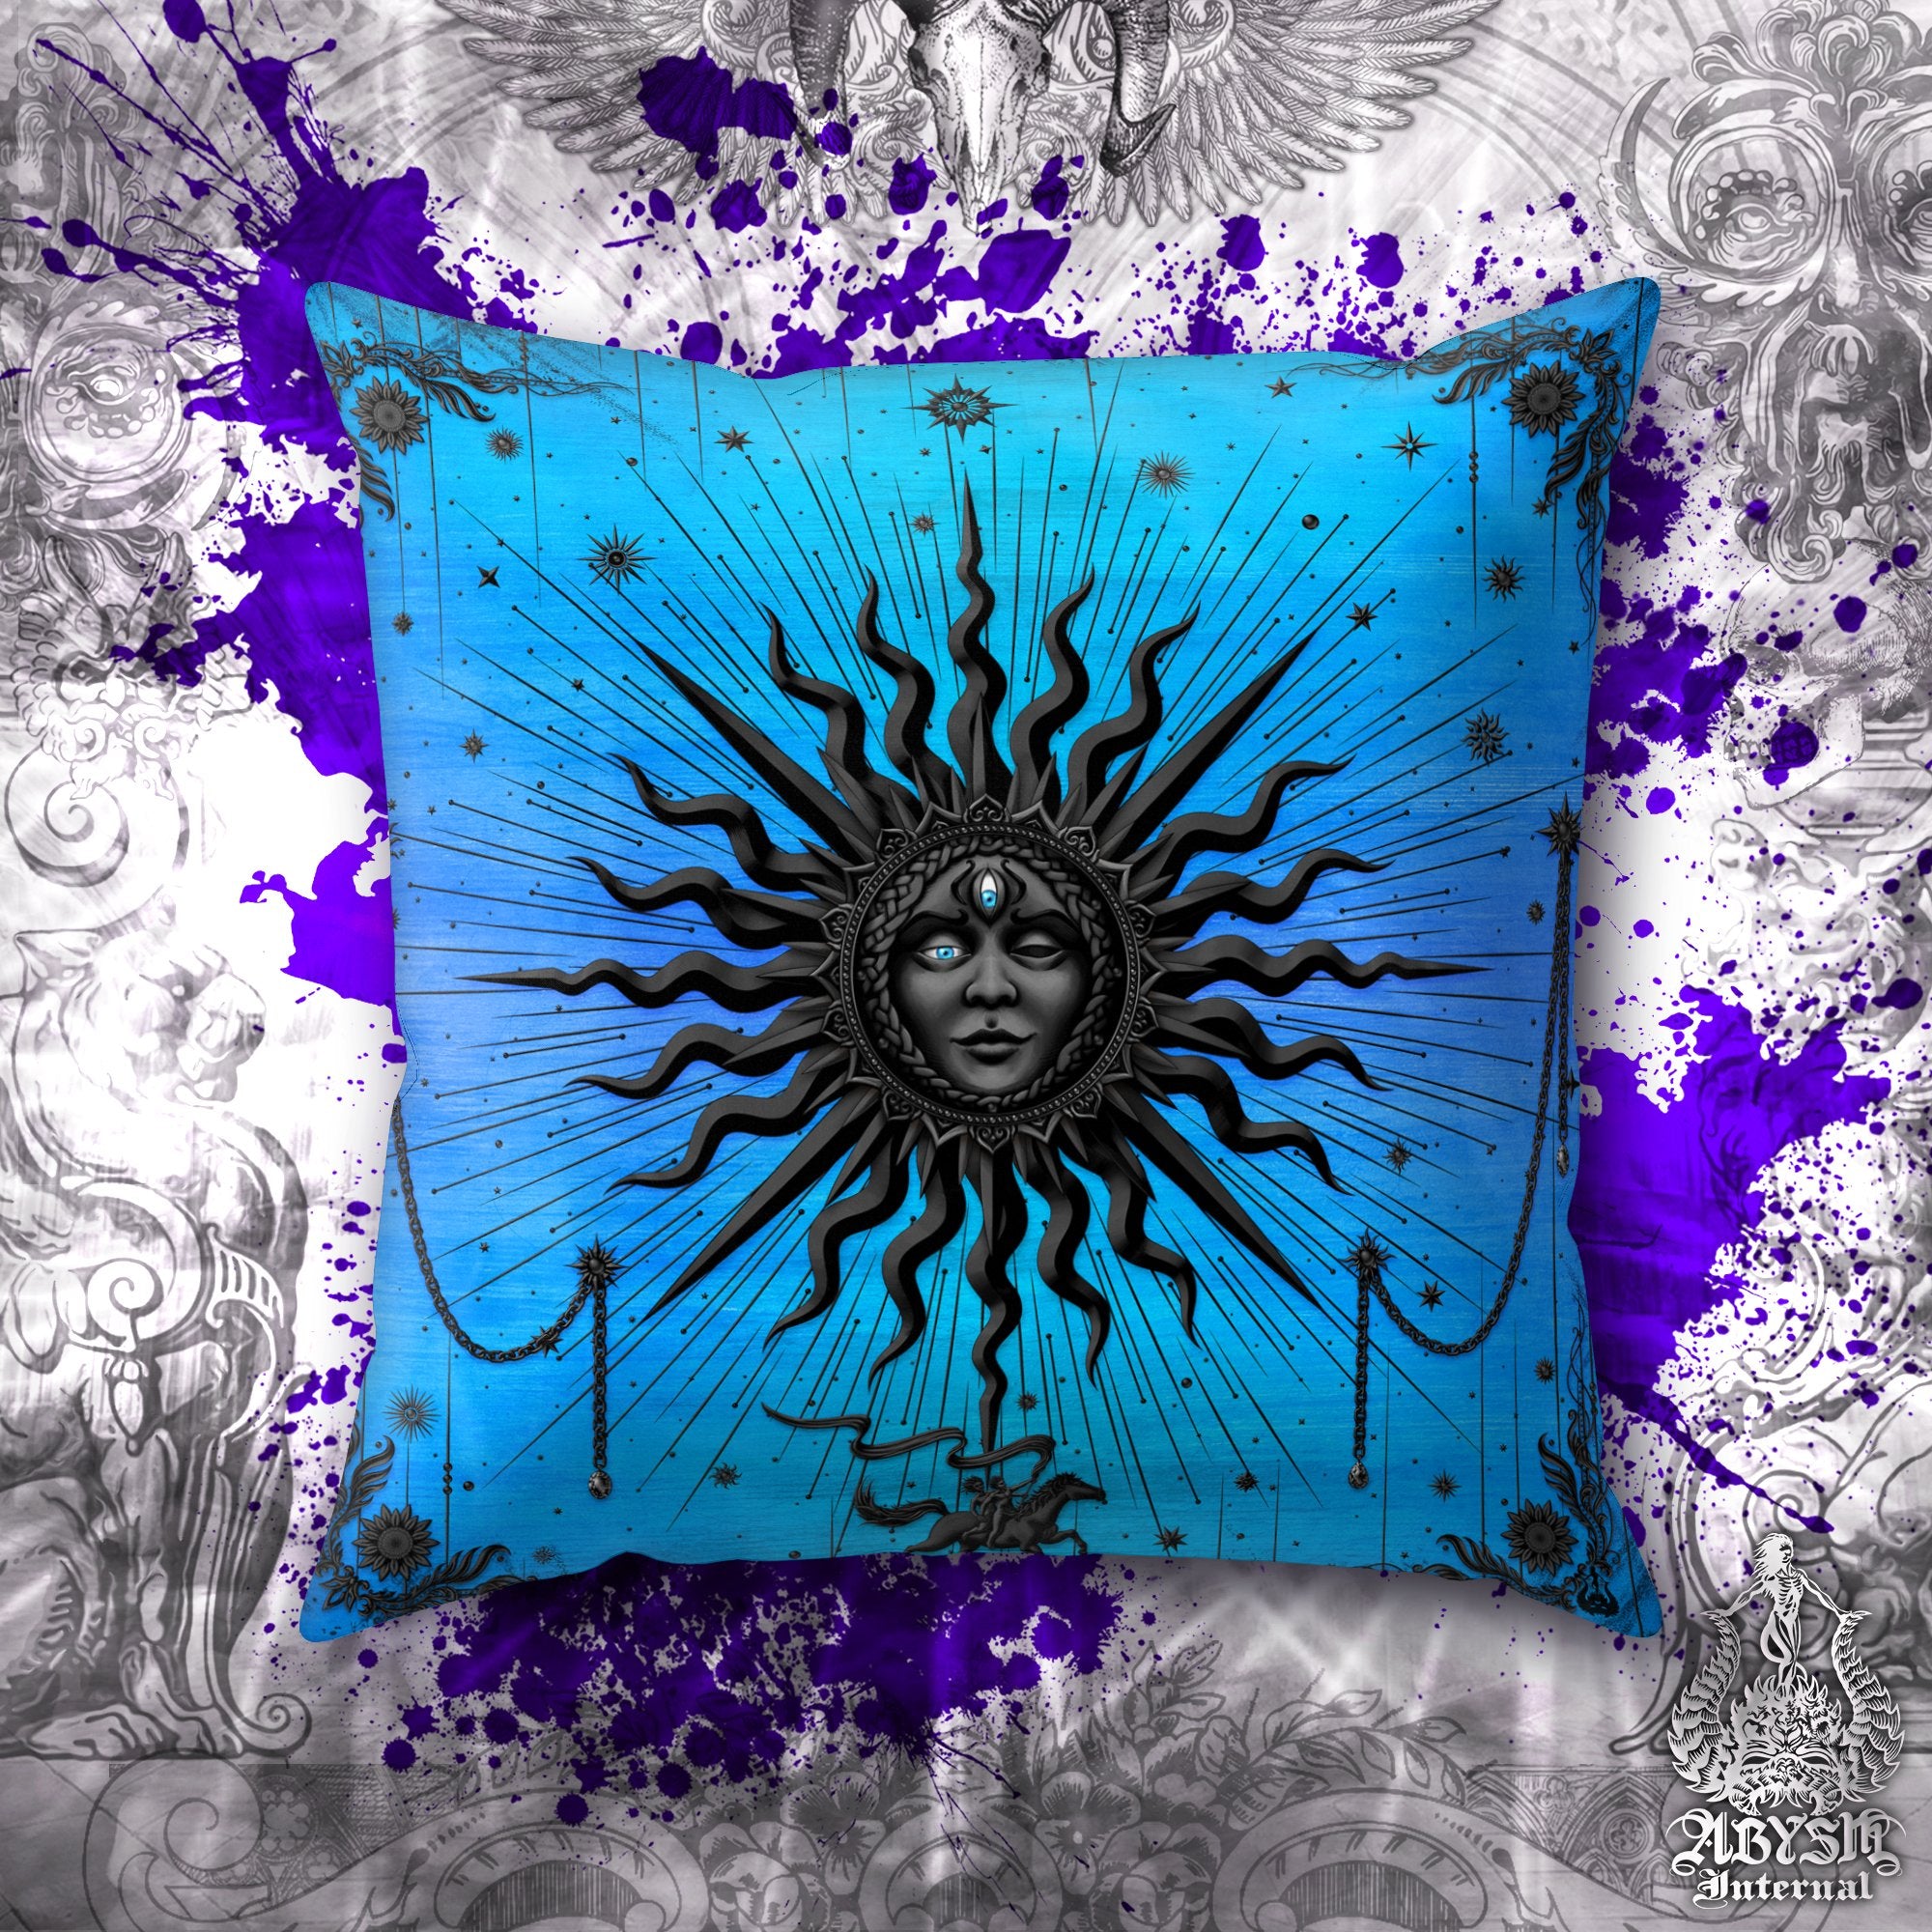 Black Sun Throw Pillow, Decorative Accent Pillow, Square Cushion Cover, Arcana Tarot Art, Witchy Home, Witch, Fortune & Magic Room Decor - Cyan - Abysm Internal